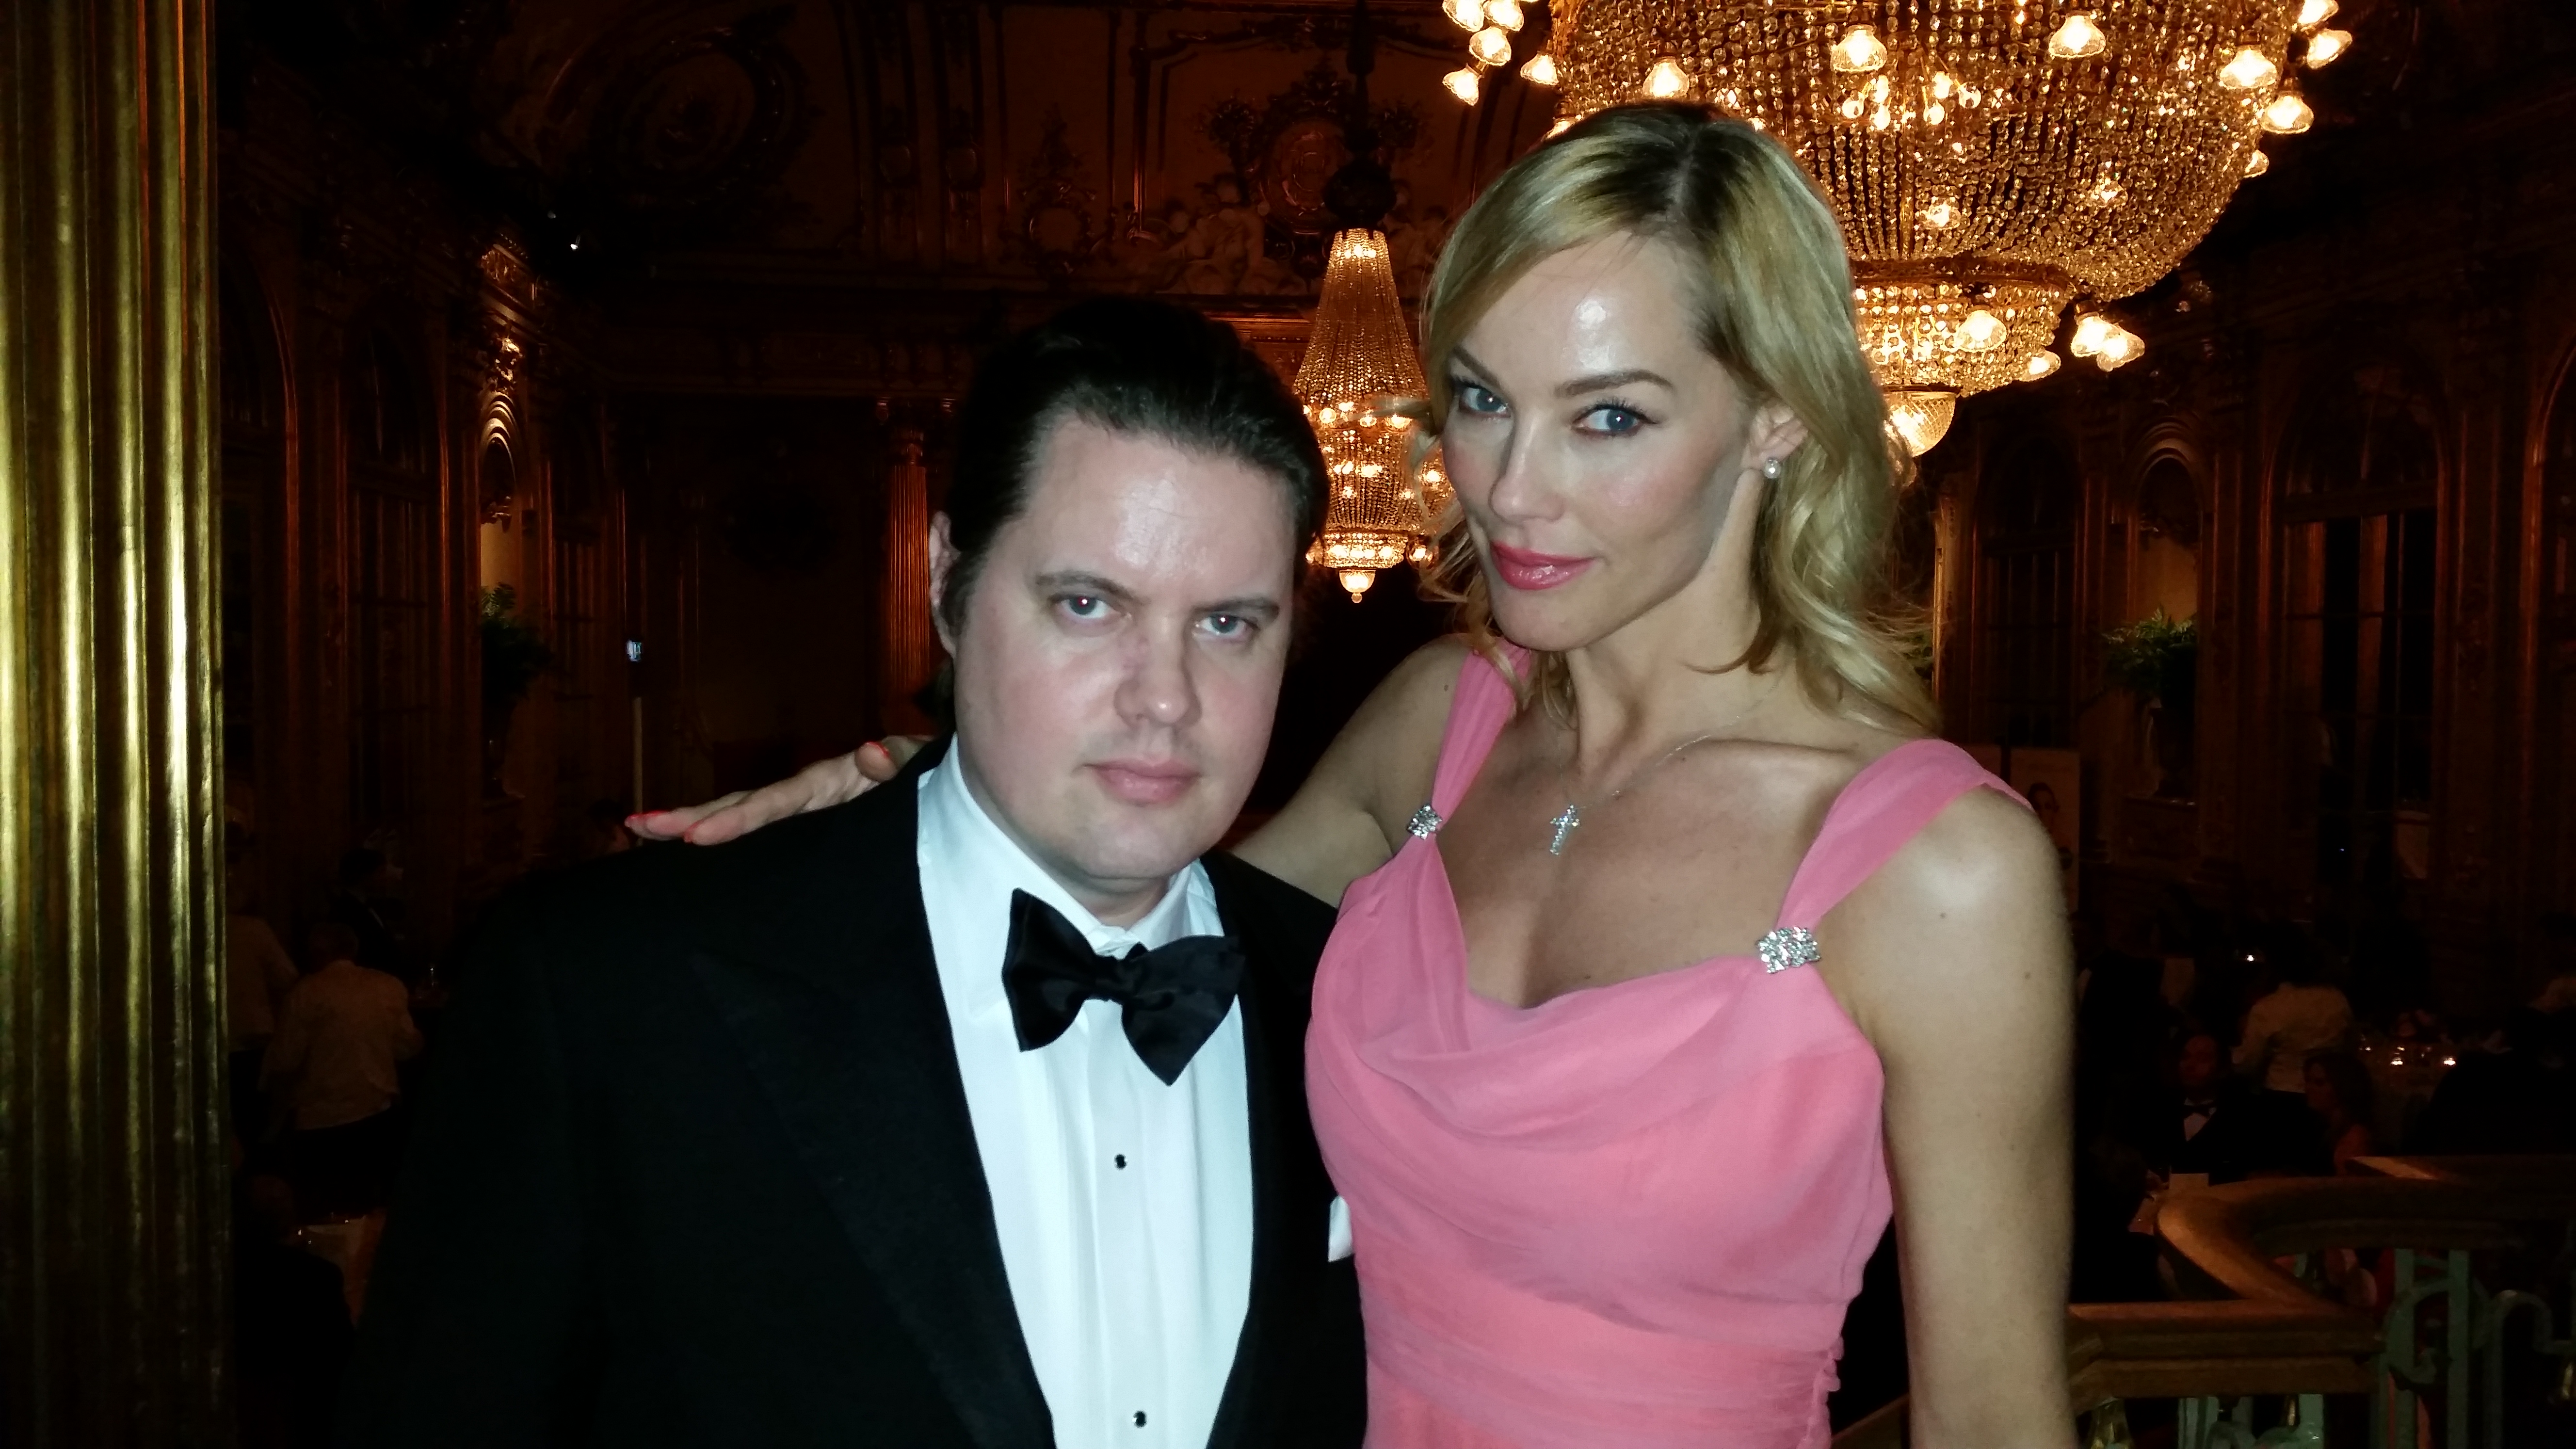 At the Winter Ball for the Childhood Foundation at the Grand Hotel in Stockholm, Sweden.